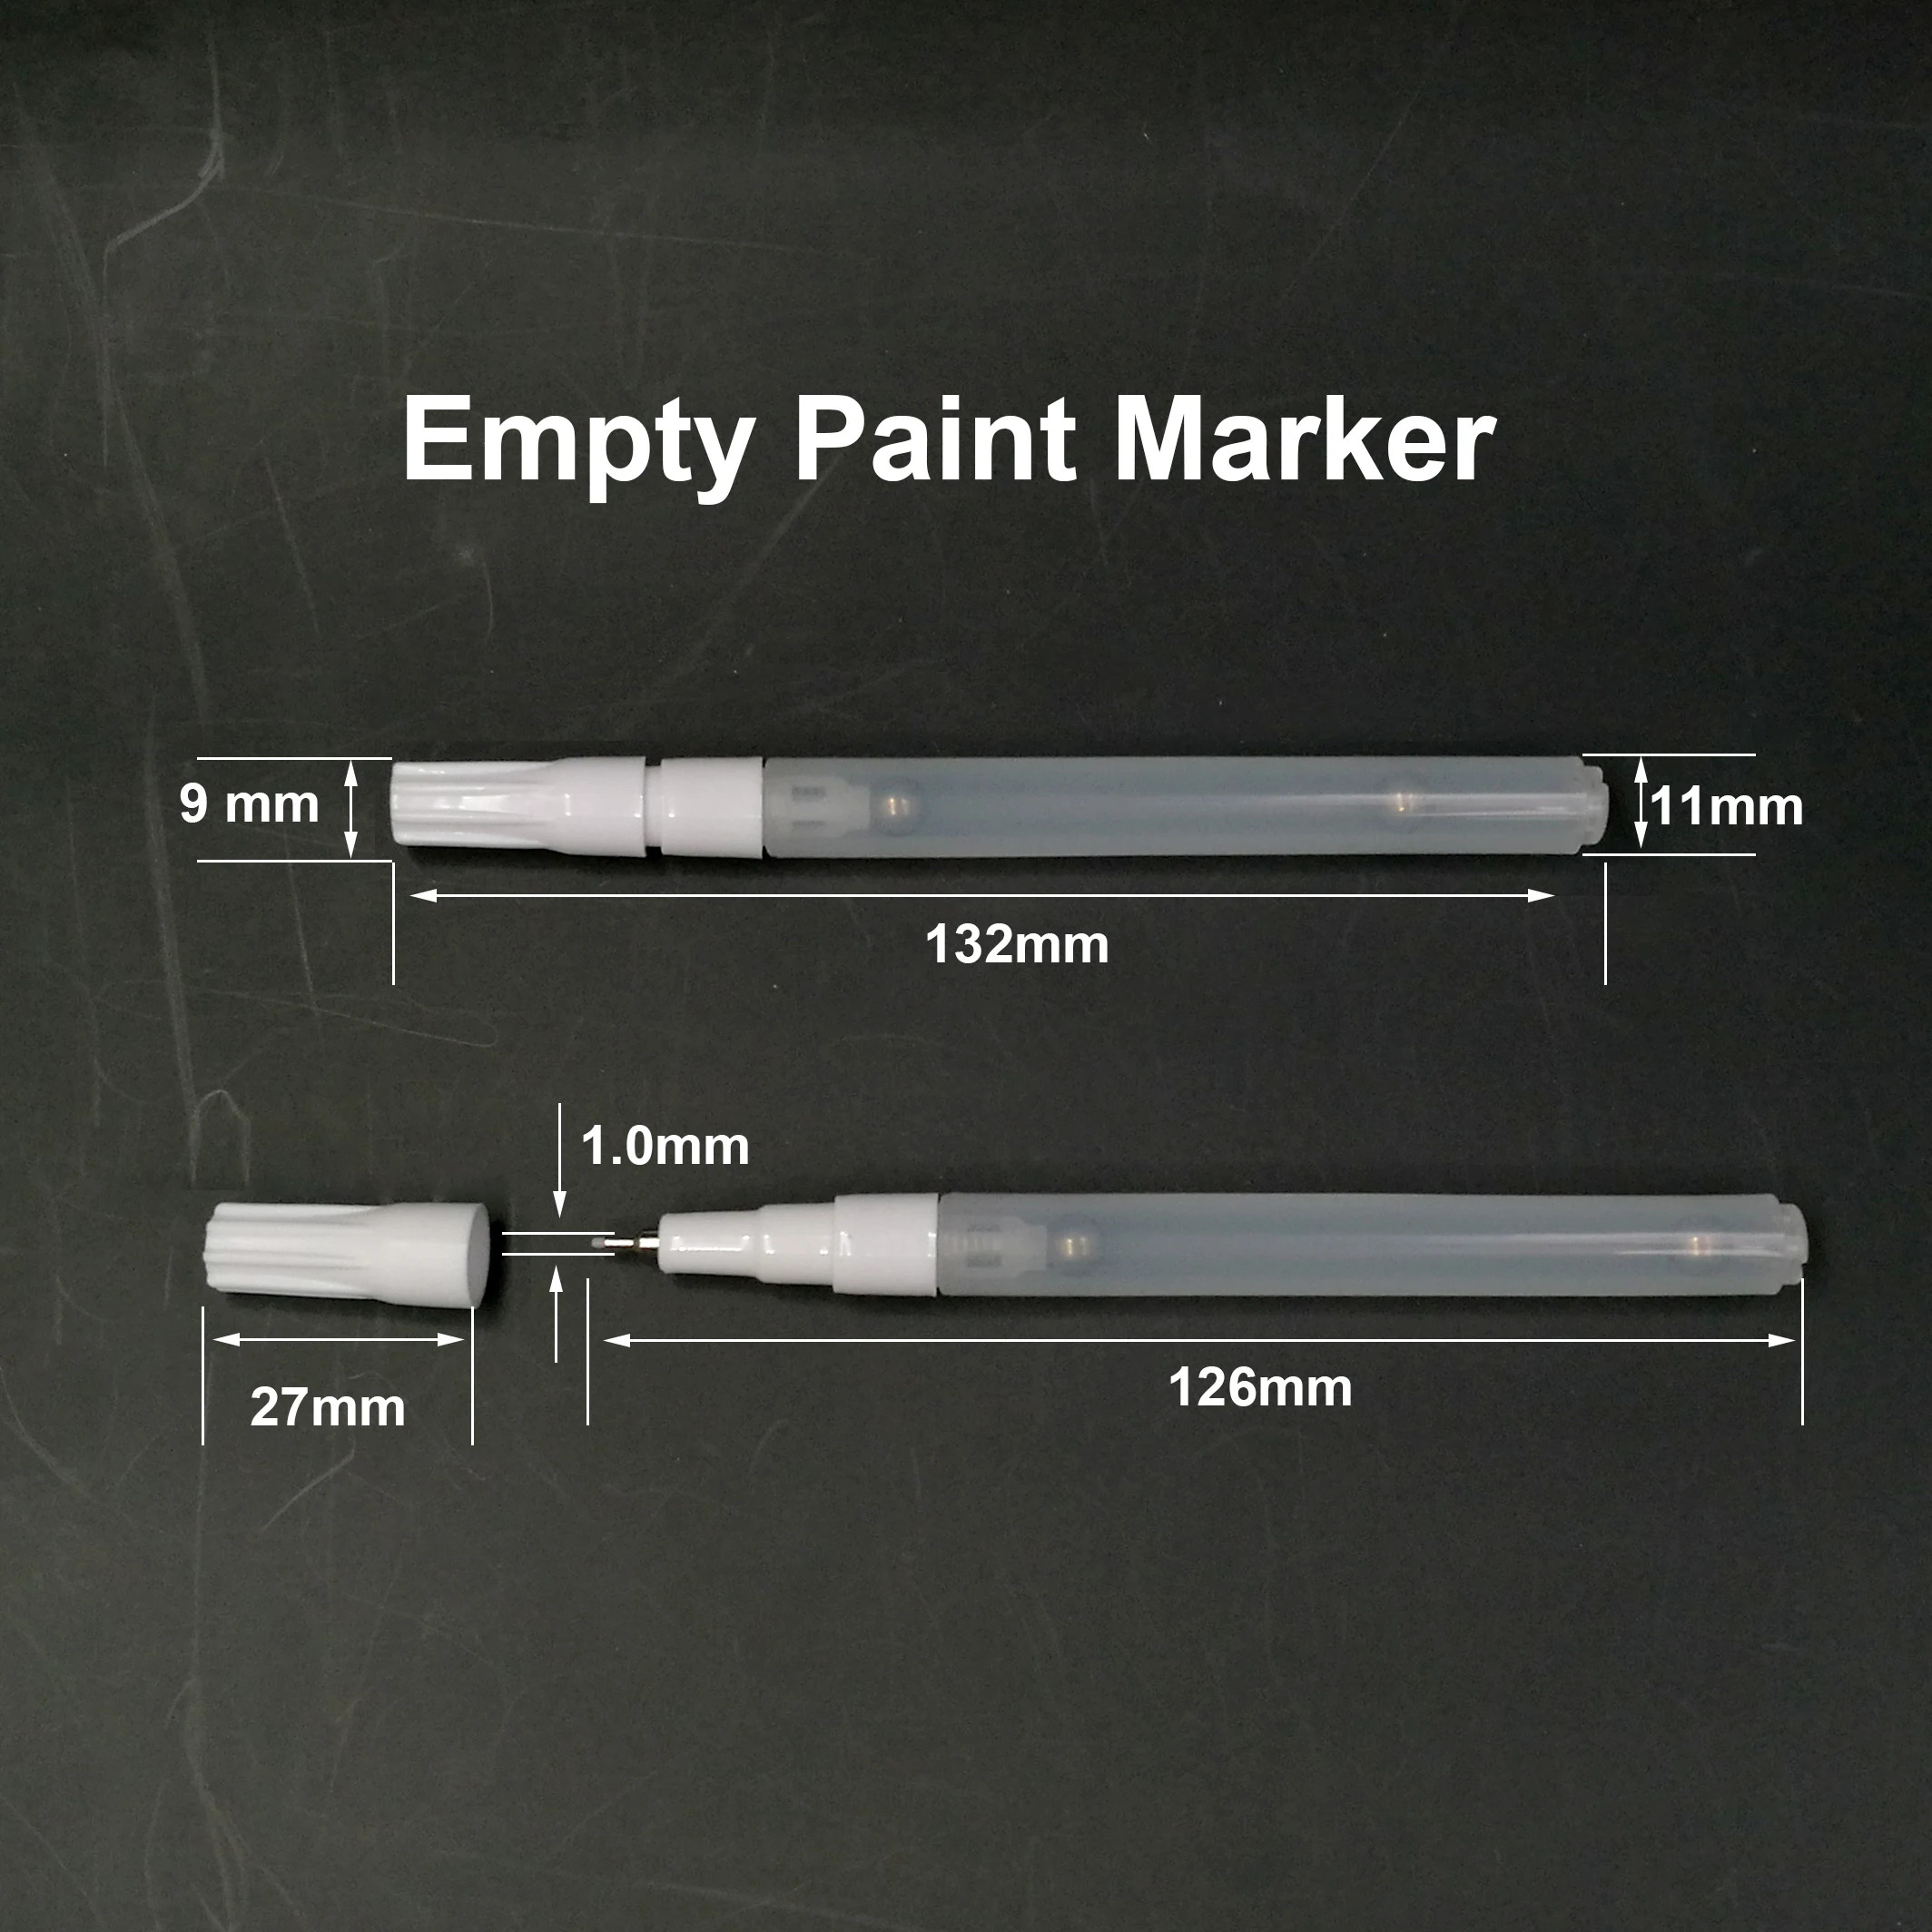 Refillable Ballpoint Paint Markers (Empty Marker)